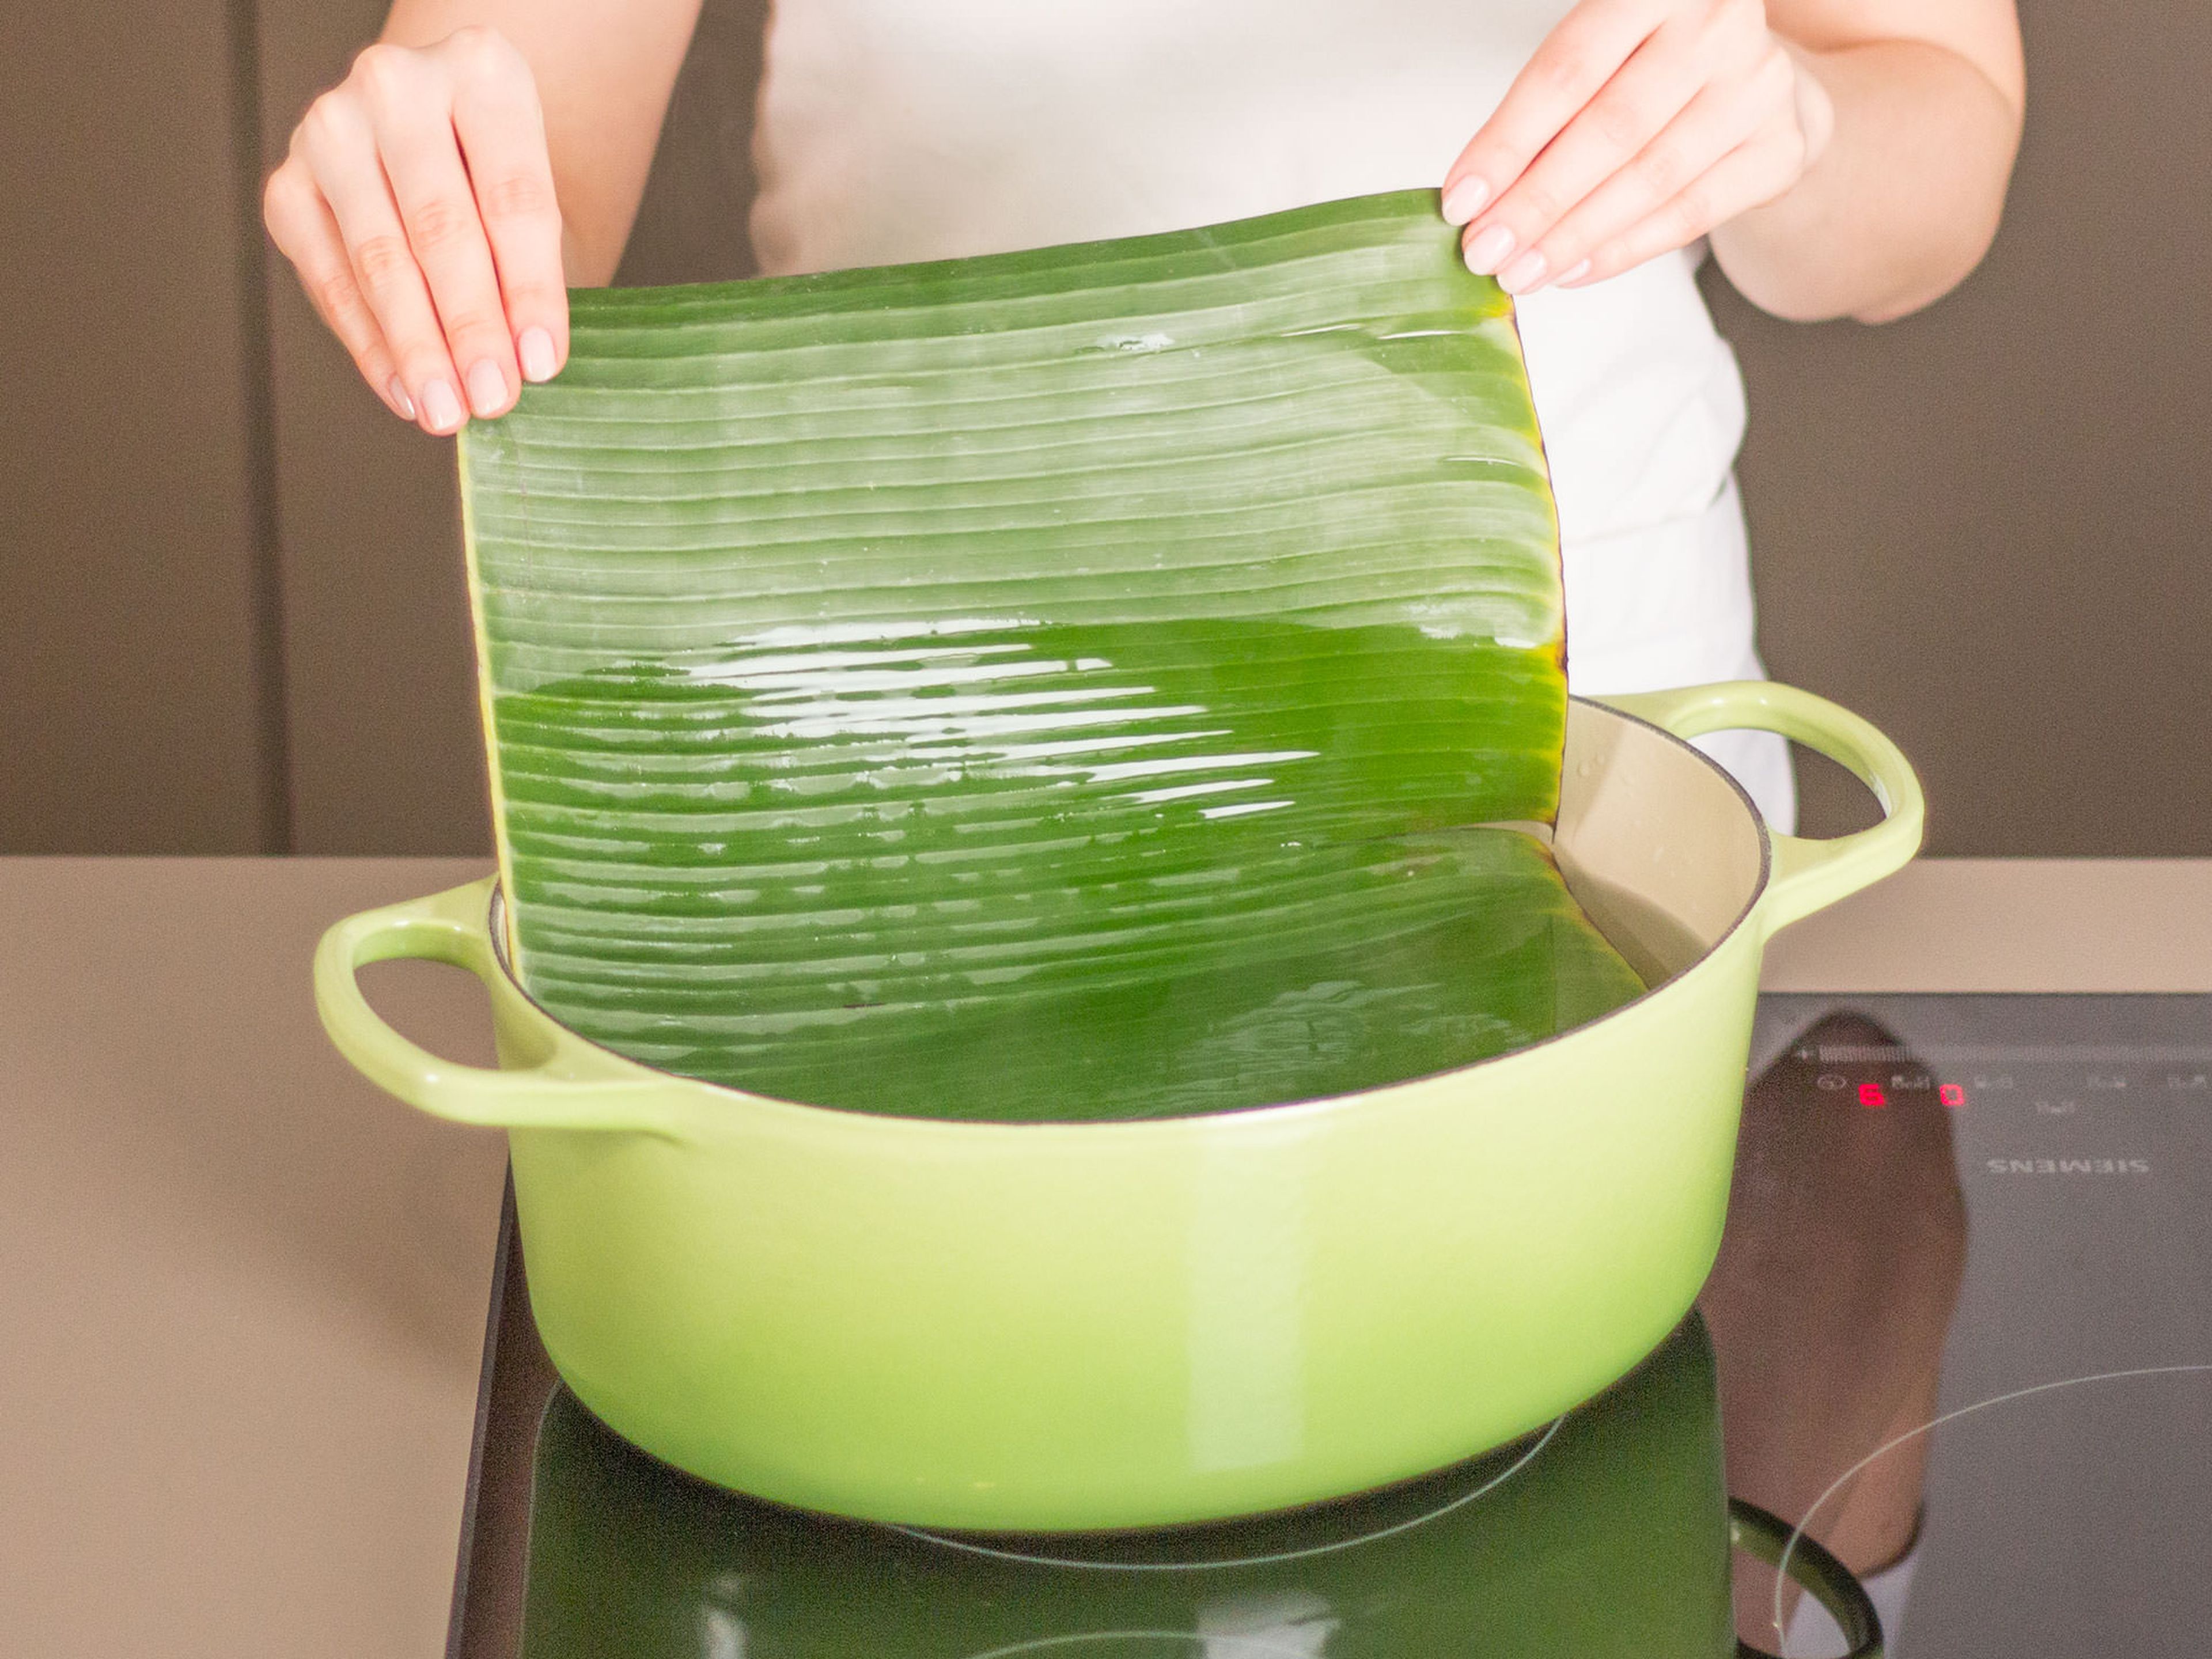 Cut banana leaves in into pieces large enough to wrap around cod pieces. Heat water in a large saucepan: do not boil. Add banana leaves one at a time for approx. 2 min., or until softened.